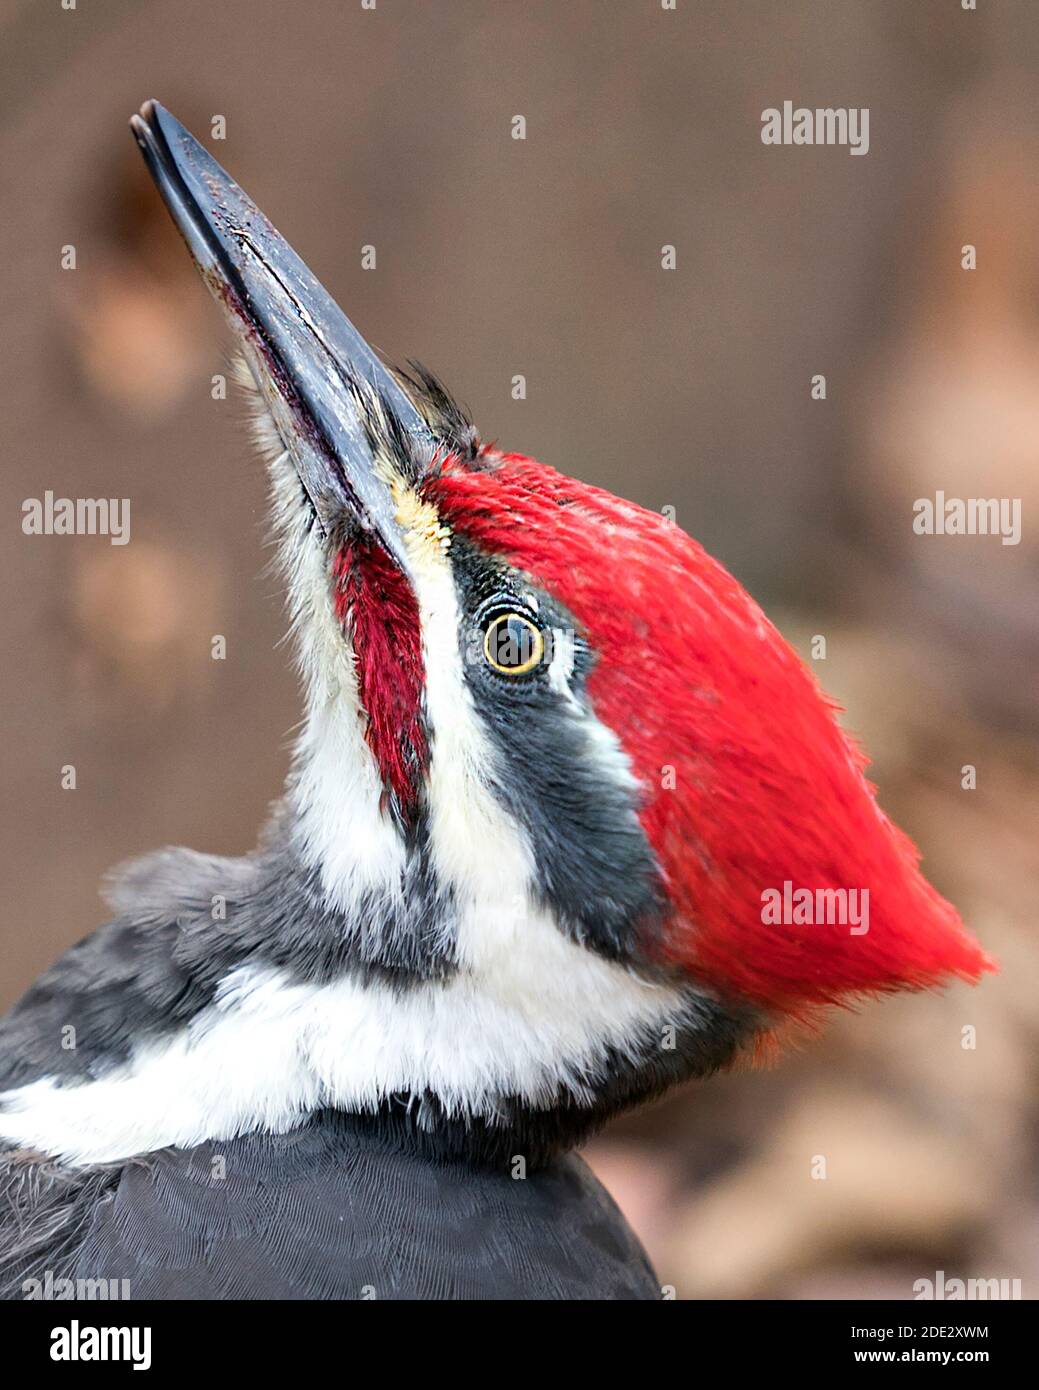 Woodpecker head shot close-up profile view with a blur background in its environment and habitat looking towards the sky. Bird head. Image. Picture. Stock Photo